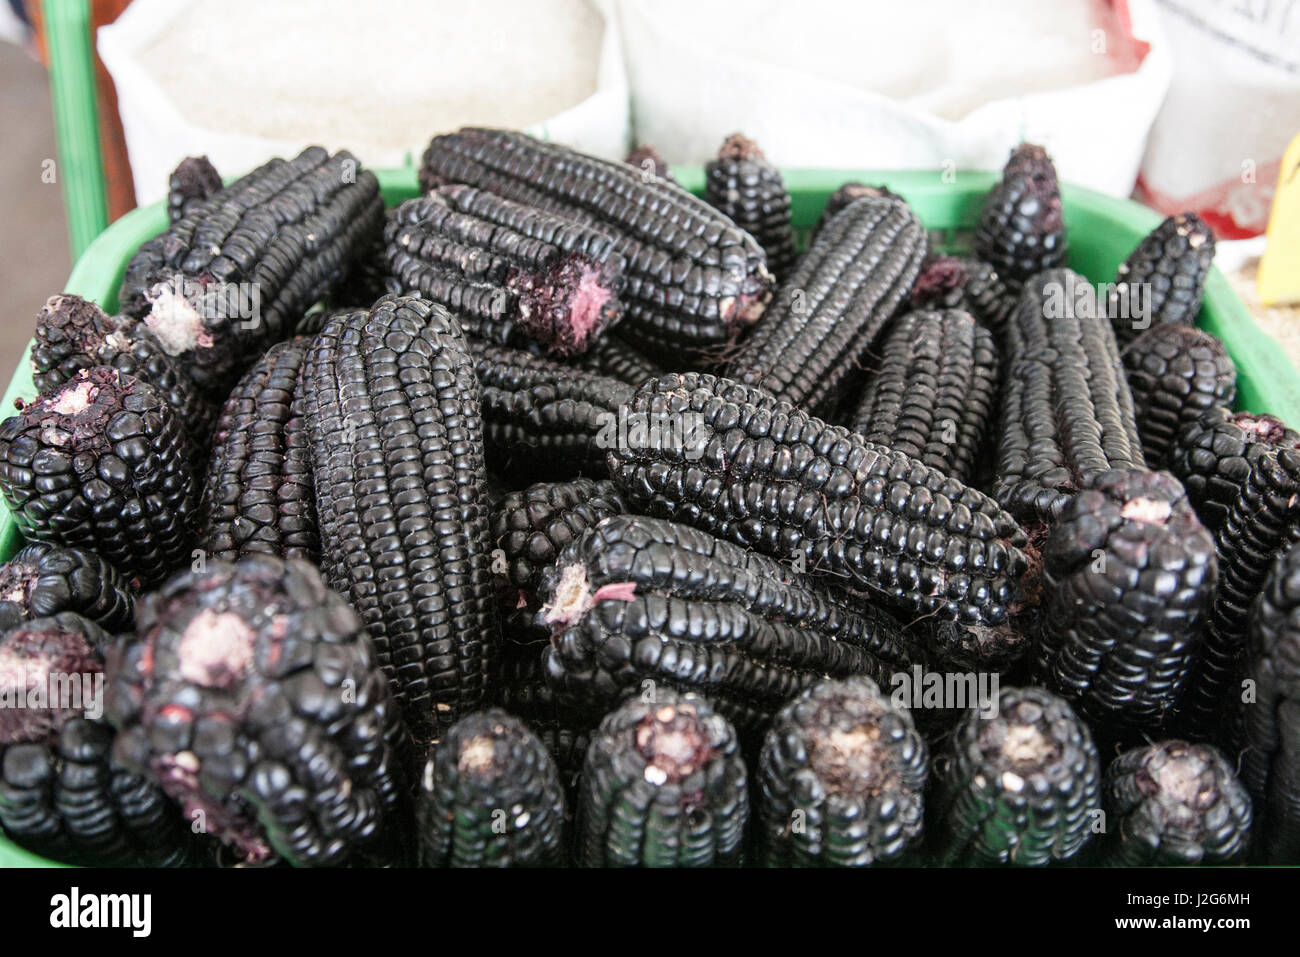 This corn, almost jet black in color, dates back 2700 years ago when nit was developed by the Inca. It is grown high in the Peruvian Andes and is used to make a drink called chica. Stock Photo